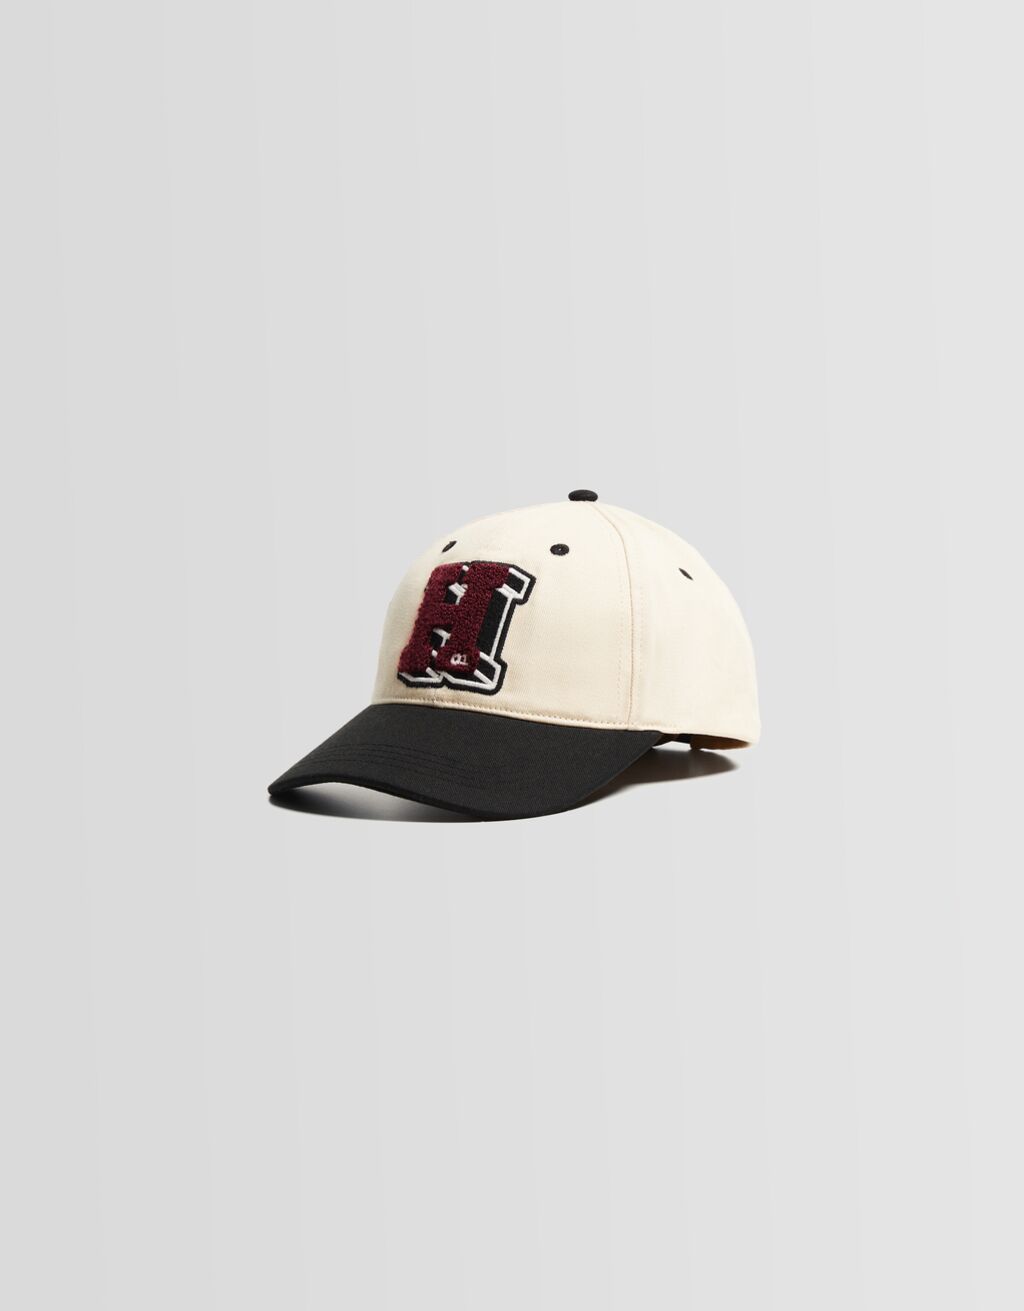 Varsity cap with patches